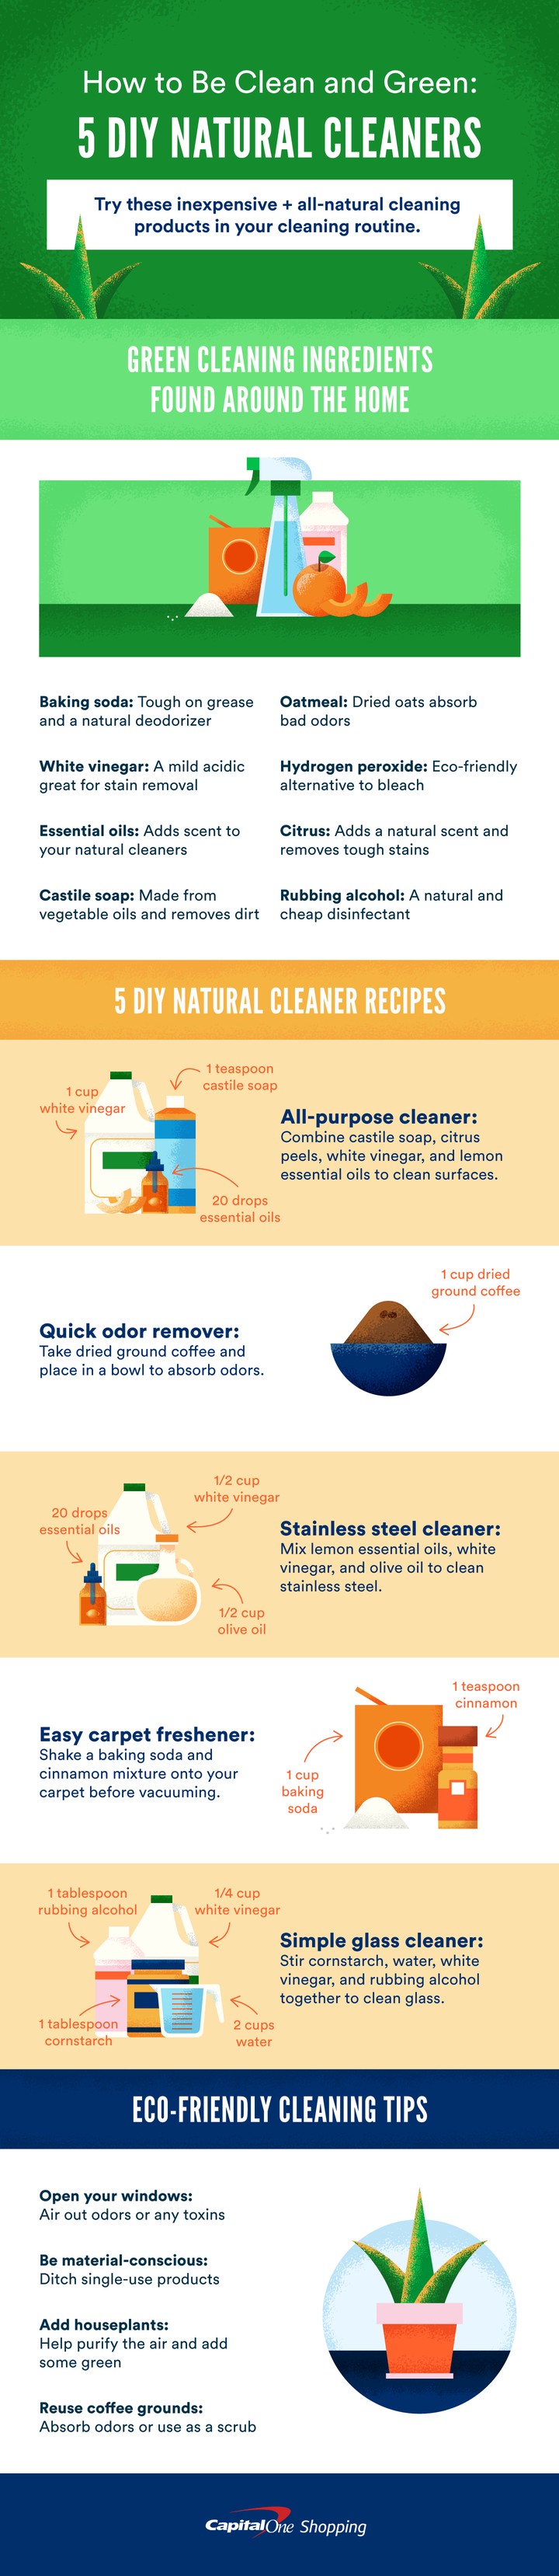 10 Benefits of Using Natural Cleaning Products in Schools - OpenWorks